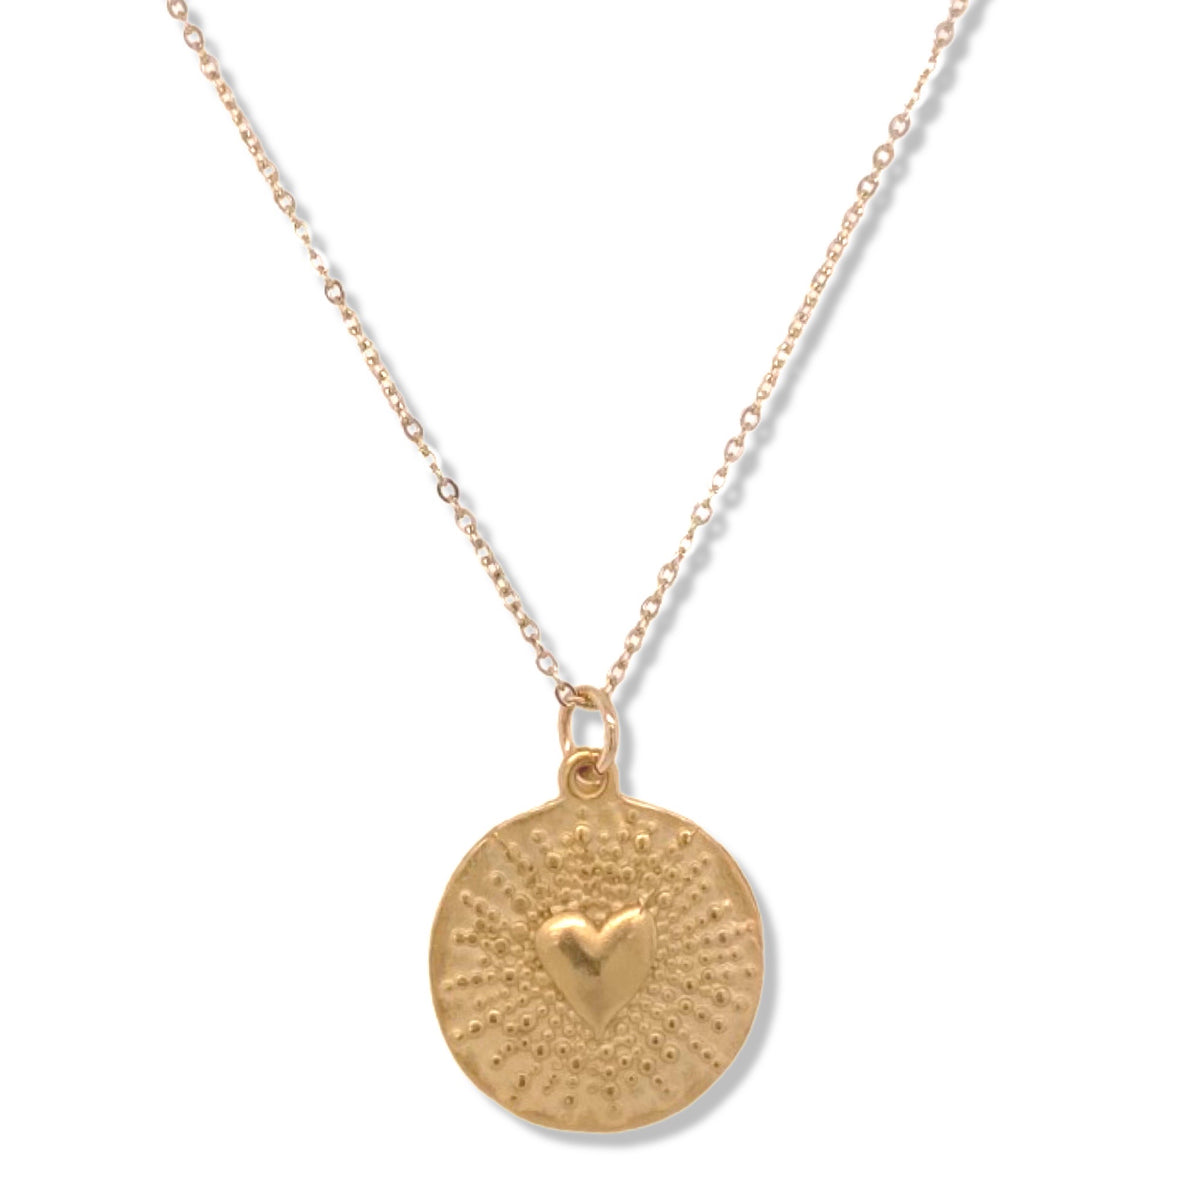 Dot Heart Necklace in Gold | Keely Smith Jewelry Designs | Nantucket